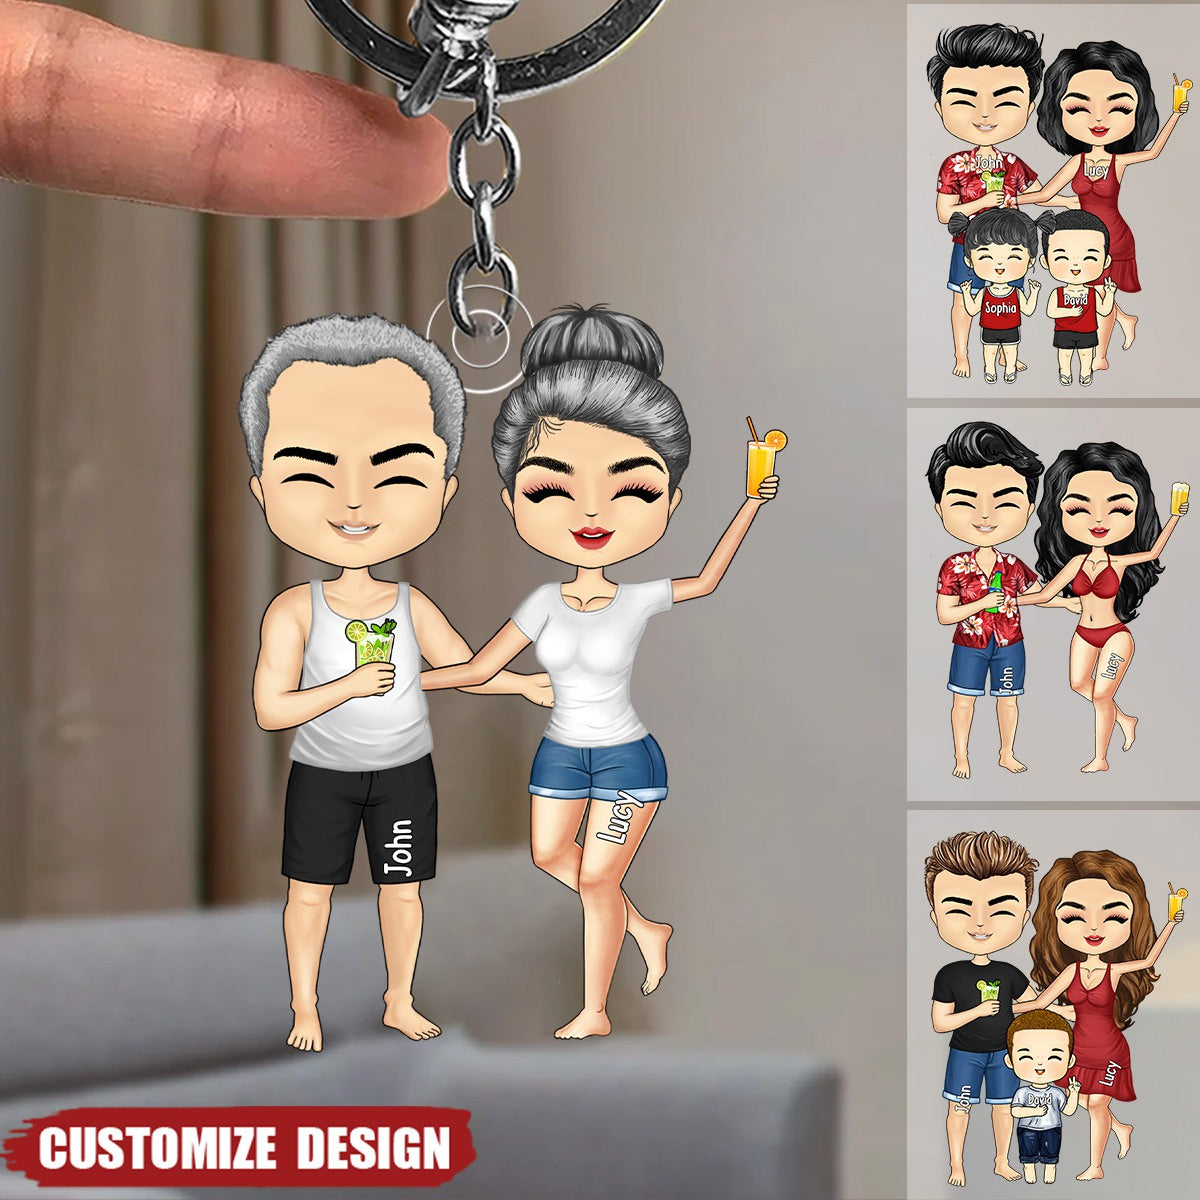 Beach Family Keychain - Gift For Couple, Dad, Mom